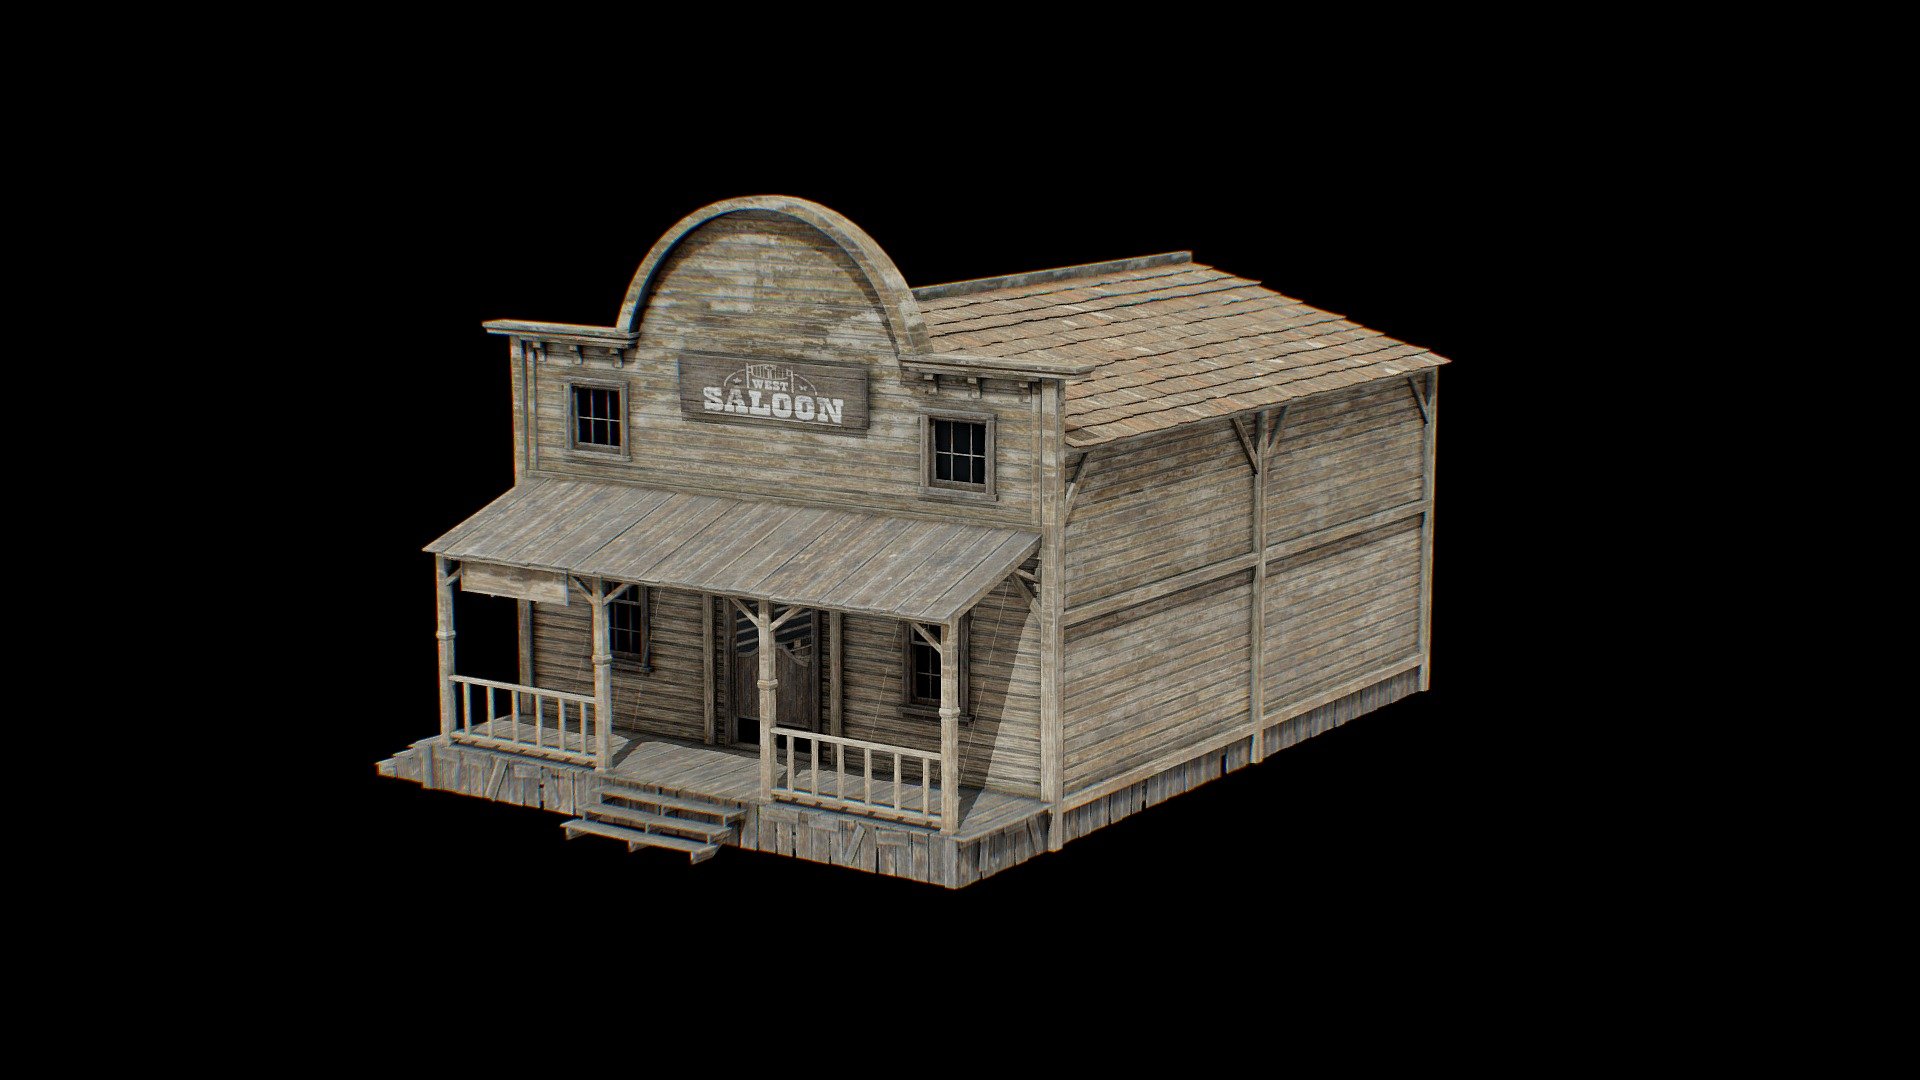 Free download：www.freepoly.org

If you like,Buy me a coffee maybe? https://www.buymeacoffee.com/riveryang - Wild West Building 02-Freepoly.org - Download Free 3D model by Freepoly.org (@blackrray) 3d model